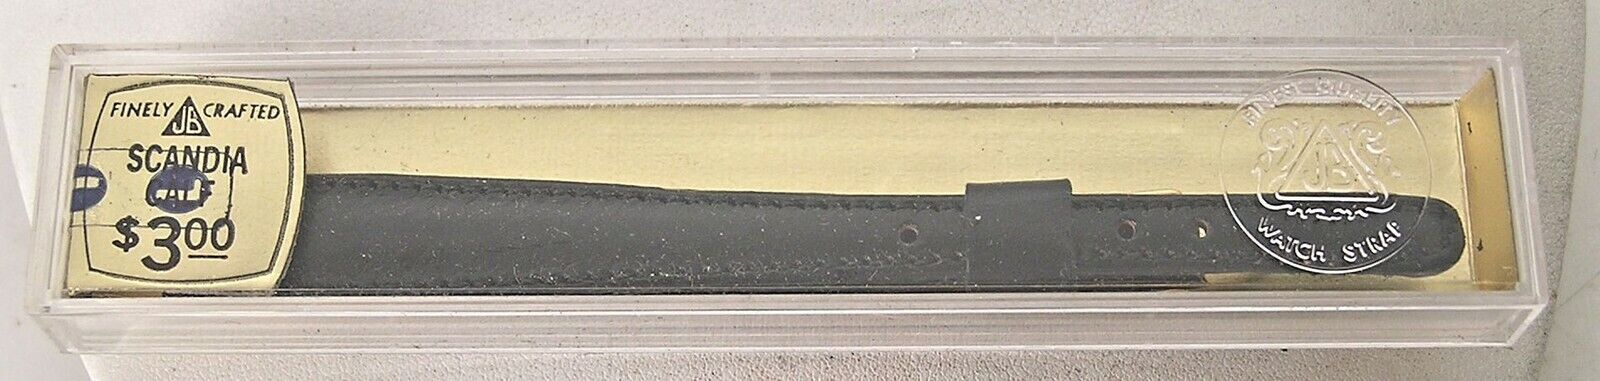 NOS Boxed JB Black Scandia #101 1/2" (13mm) Women's Watch Band Yellow Buckle